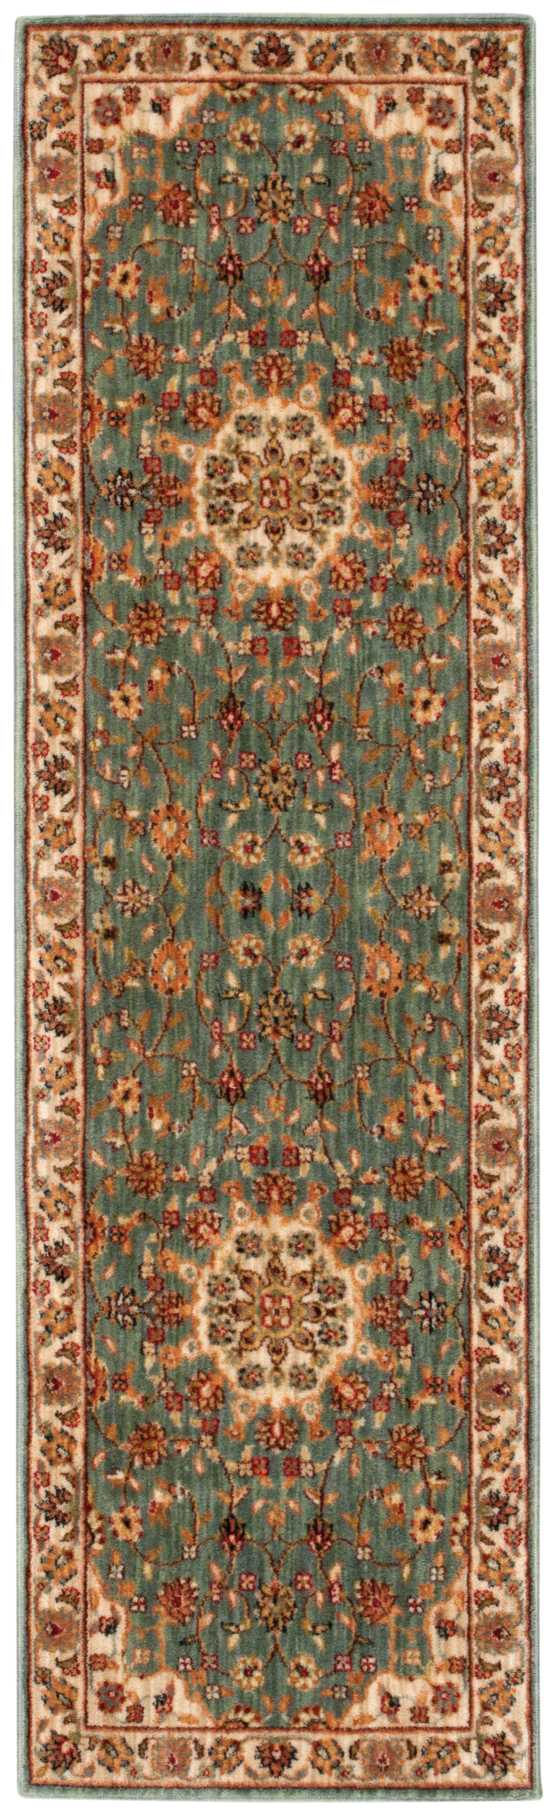 Kathy Ireland Ancient Times Palace Teal Area Rug by Nourison